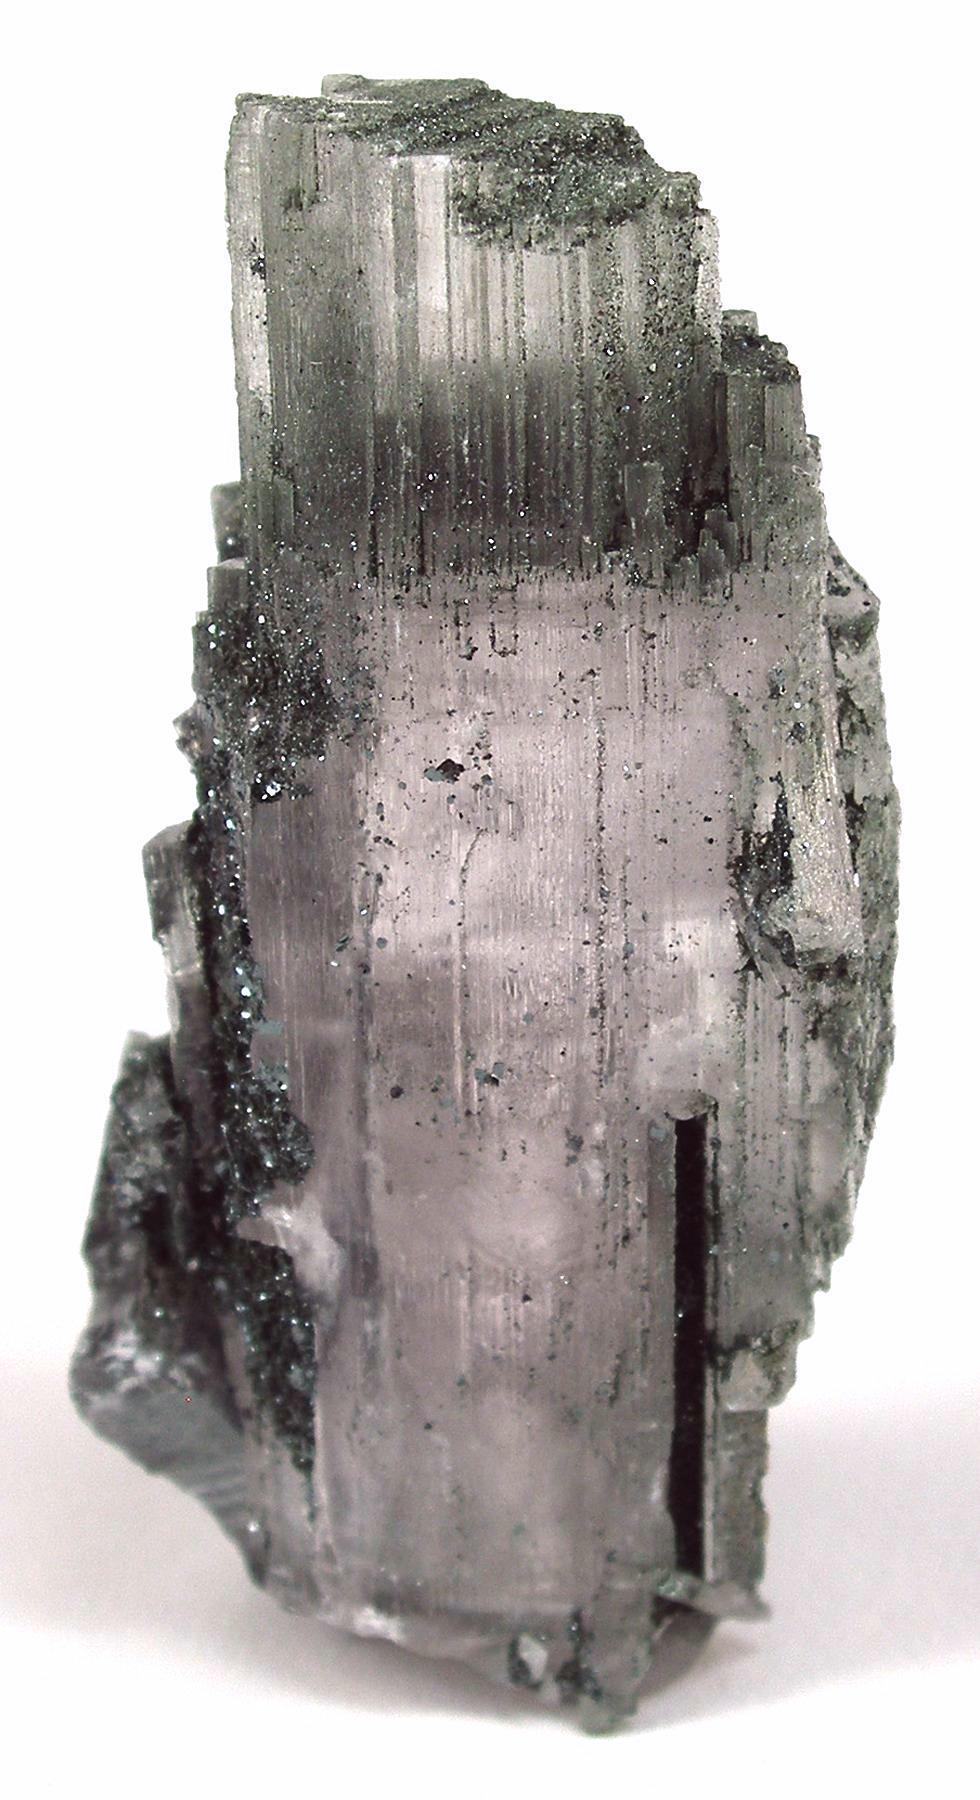 Lilac Floater Anhydrite Crystal from St. Gotthard tunnel, NEAT Construction site, Amsteg, Reuss Valley, Uri, Switzerland